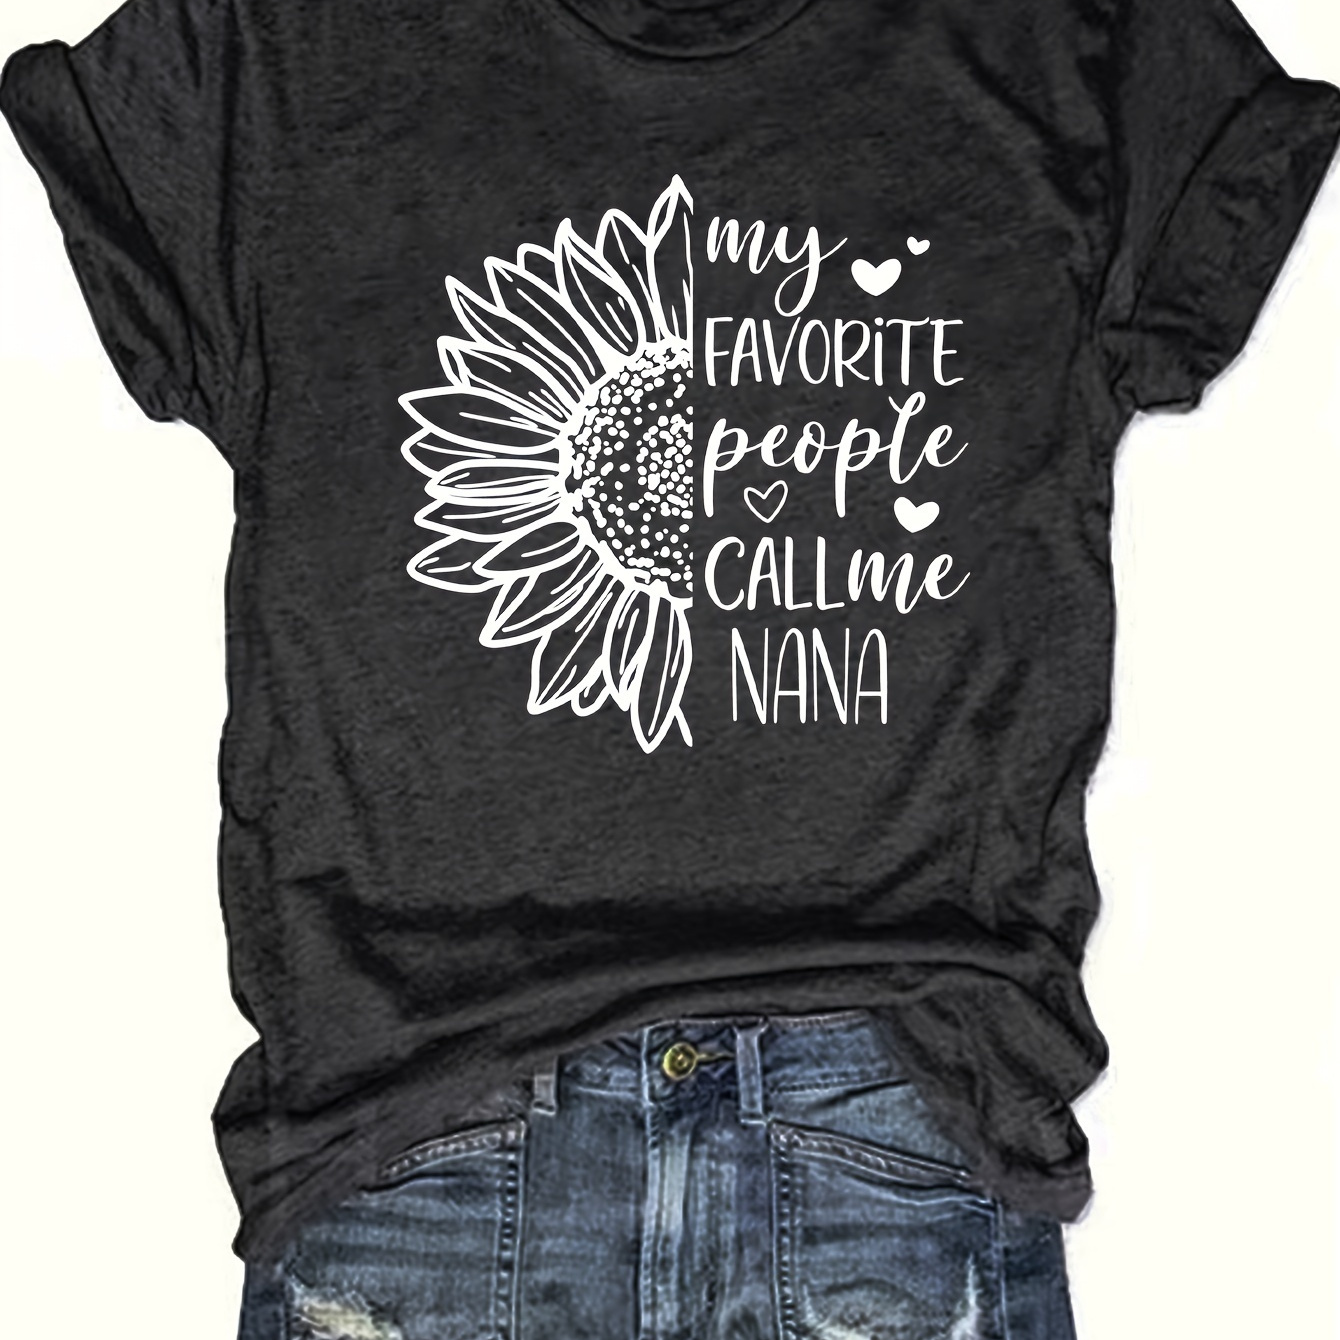 

Call Me Nana T-shirt, Short Sleeve Crew Neck Casual Top For Summer & Spring, Women's Clothing